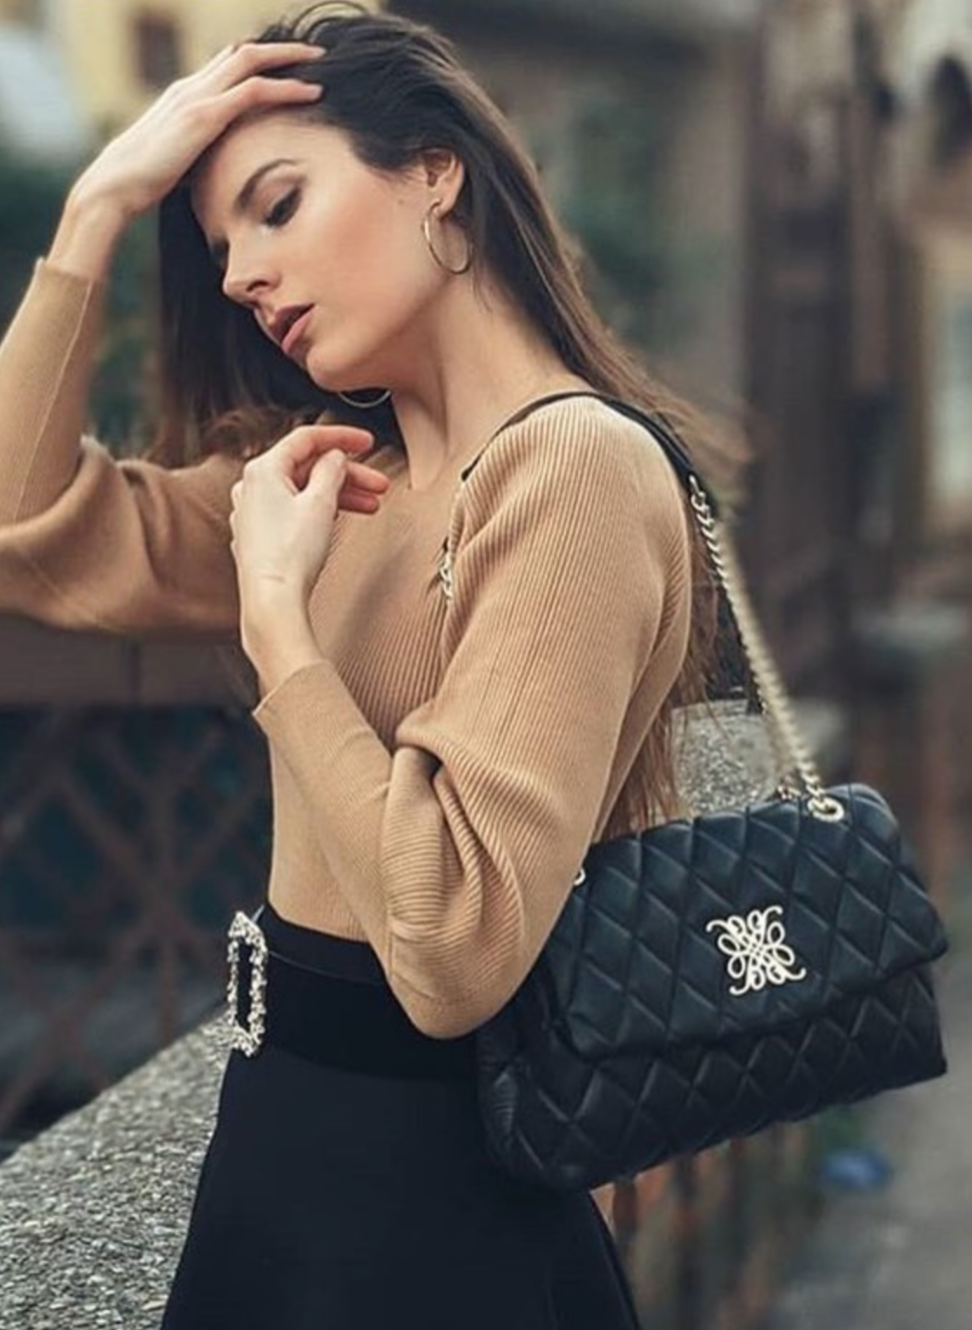 Chantal is an Italian luxury bag Made in Italy by skilled artisans